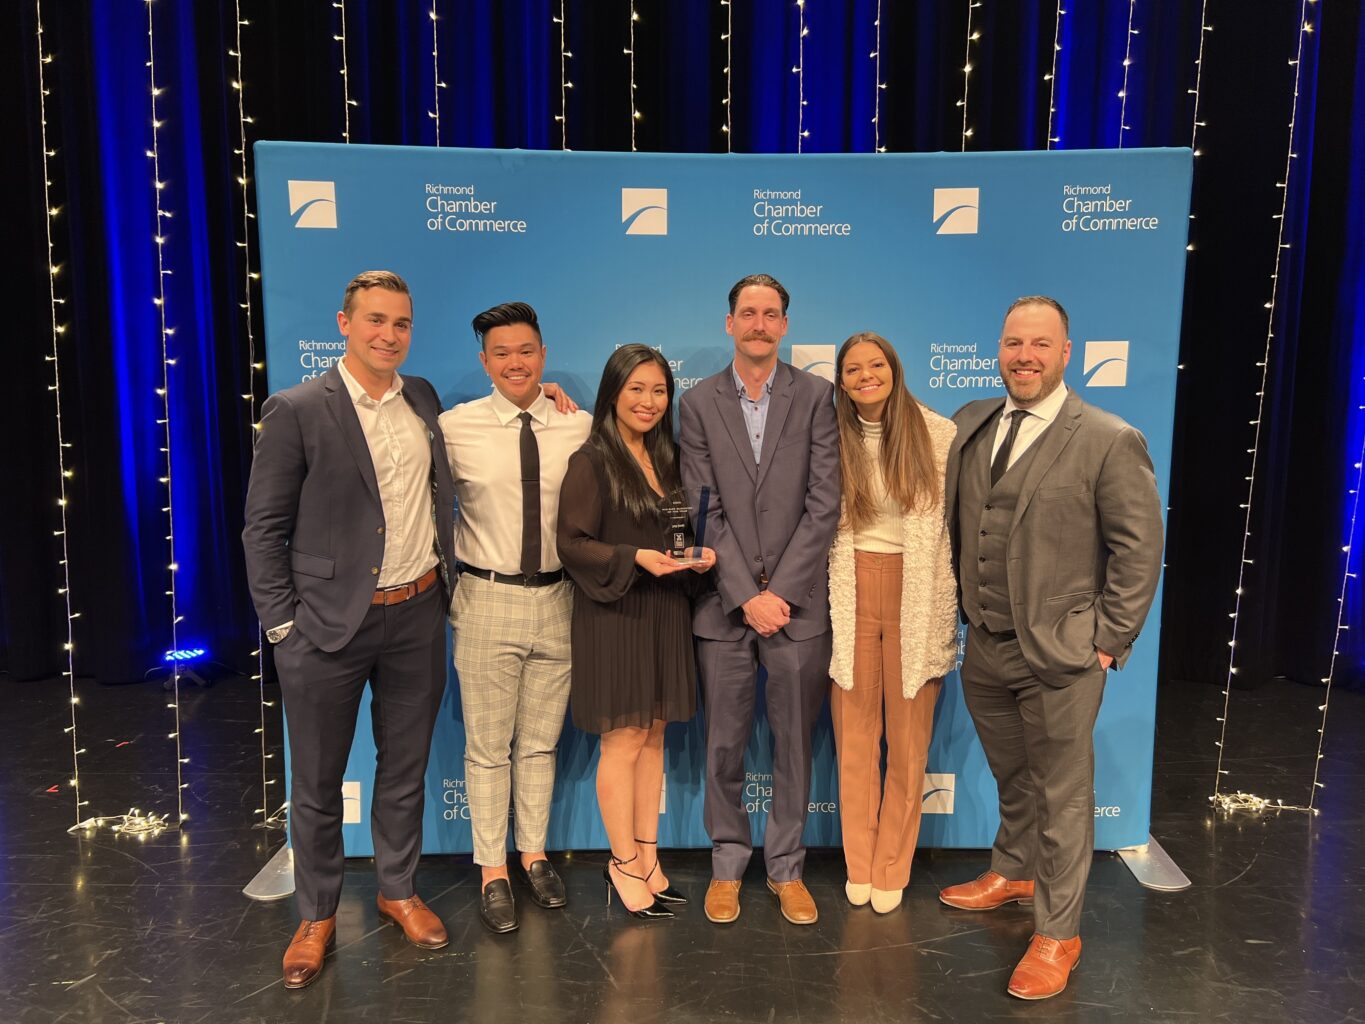 The 505-Junk team accepting the Mid-Size Business of the Year award at the Richmond Chamber of Commerce Business Excellence Awards Gala.